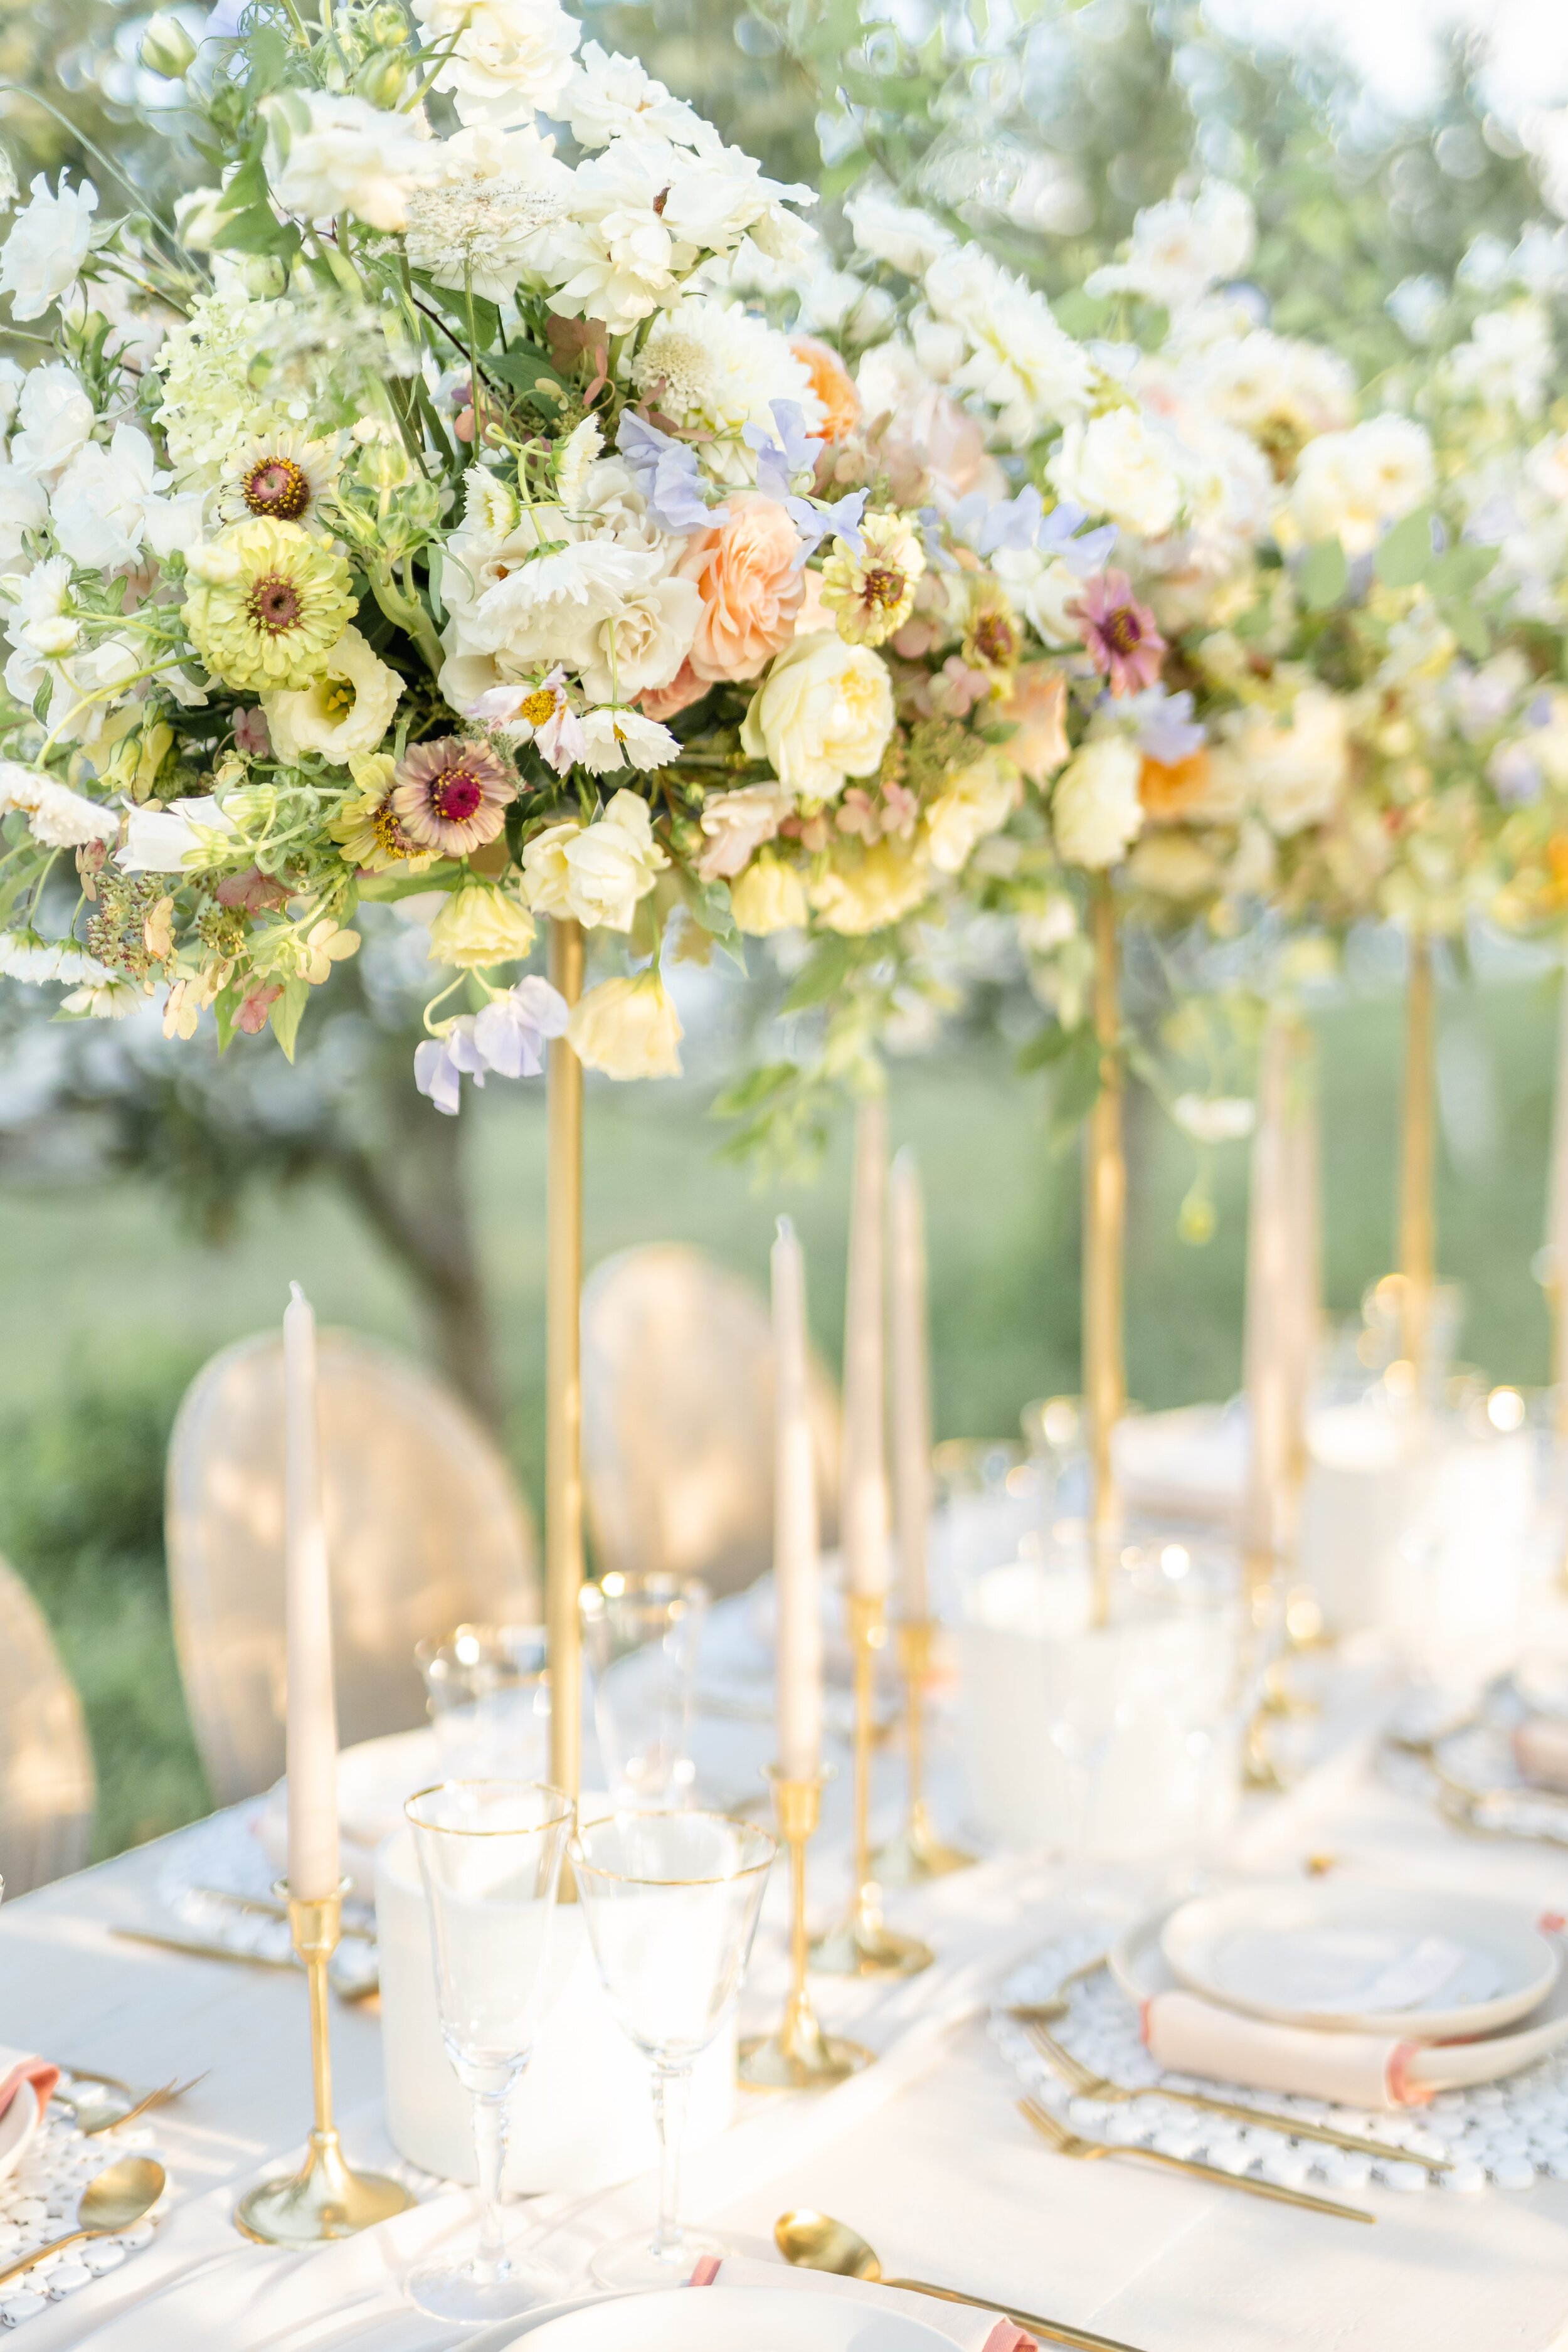 Delicate Luxe Micro-Wedding Inspired by Amalfis Lush, Romantic landscapes | Dylan & Sandra Photography -30.jpg